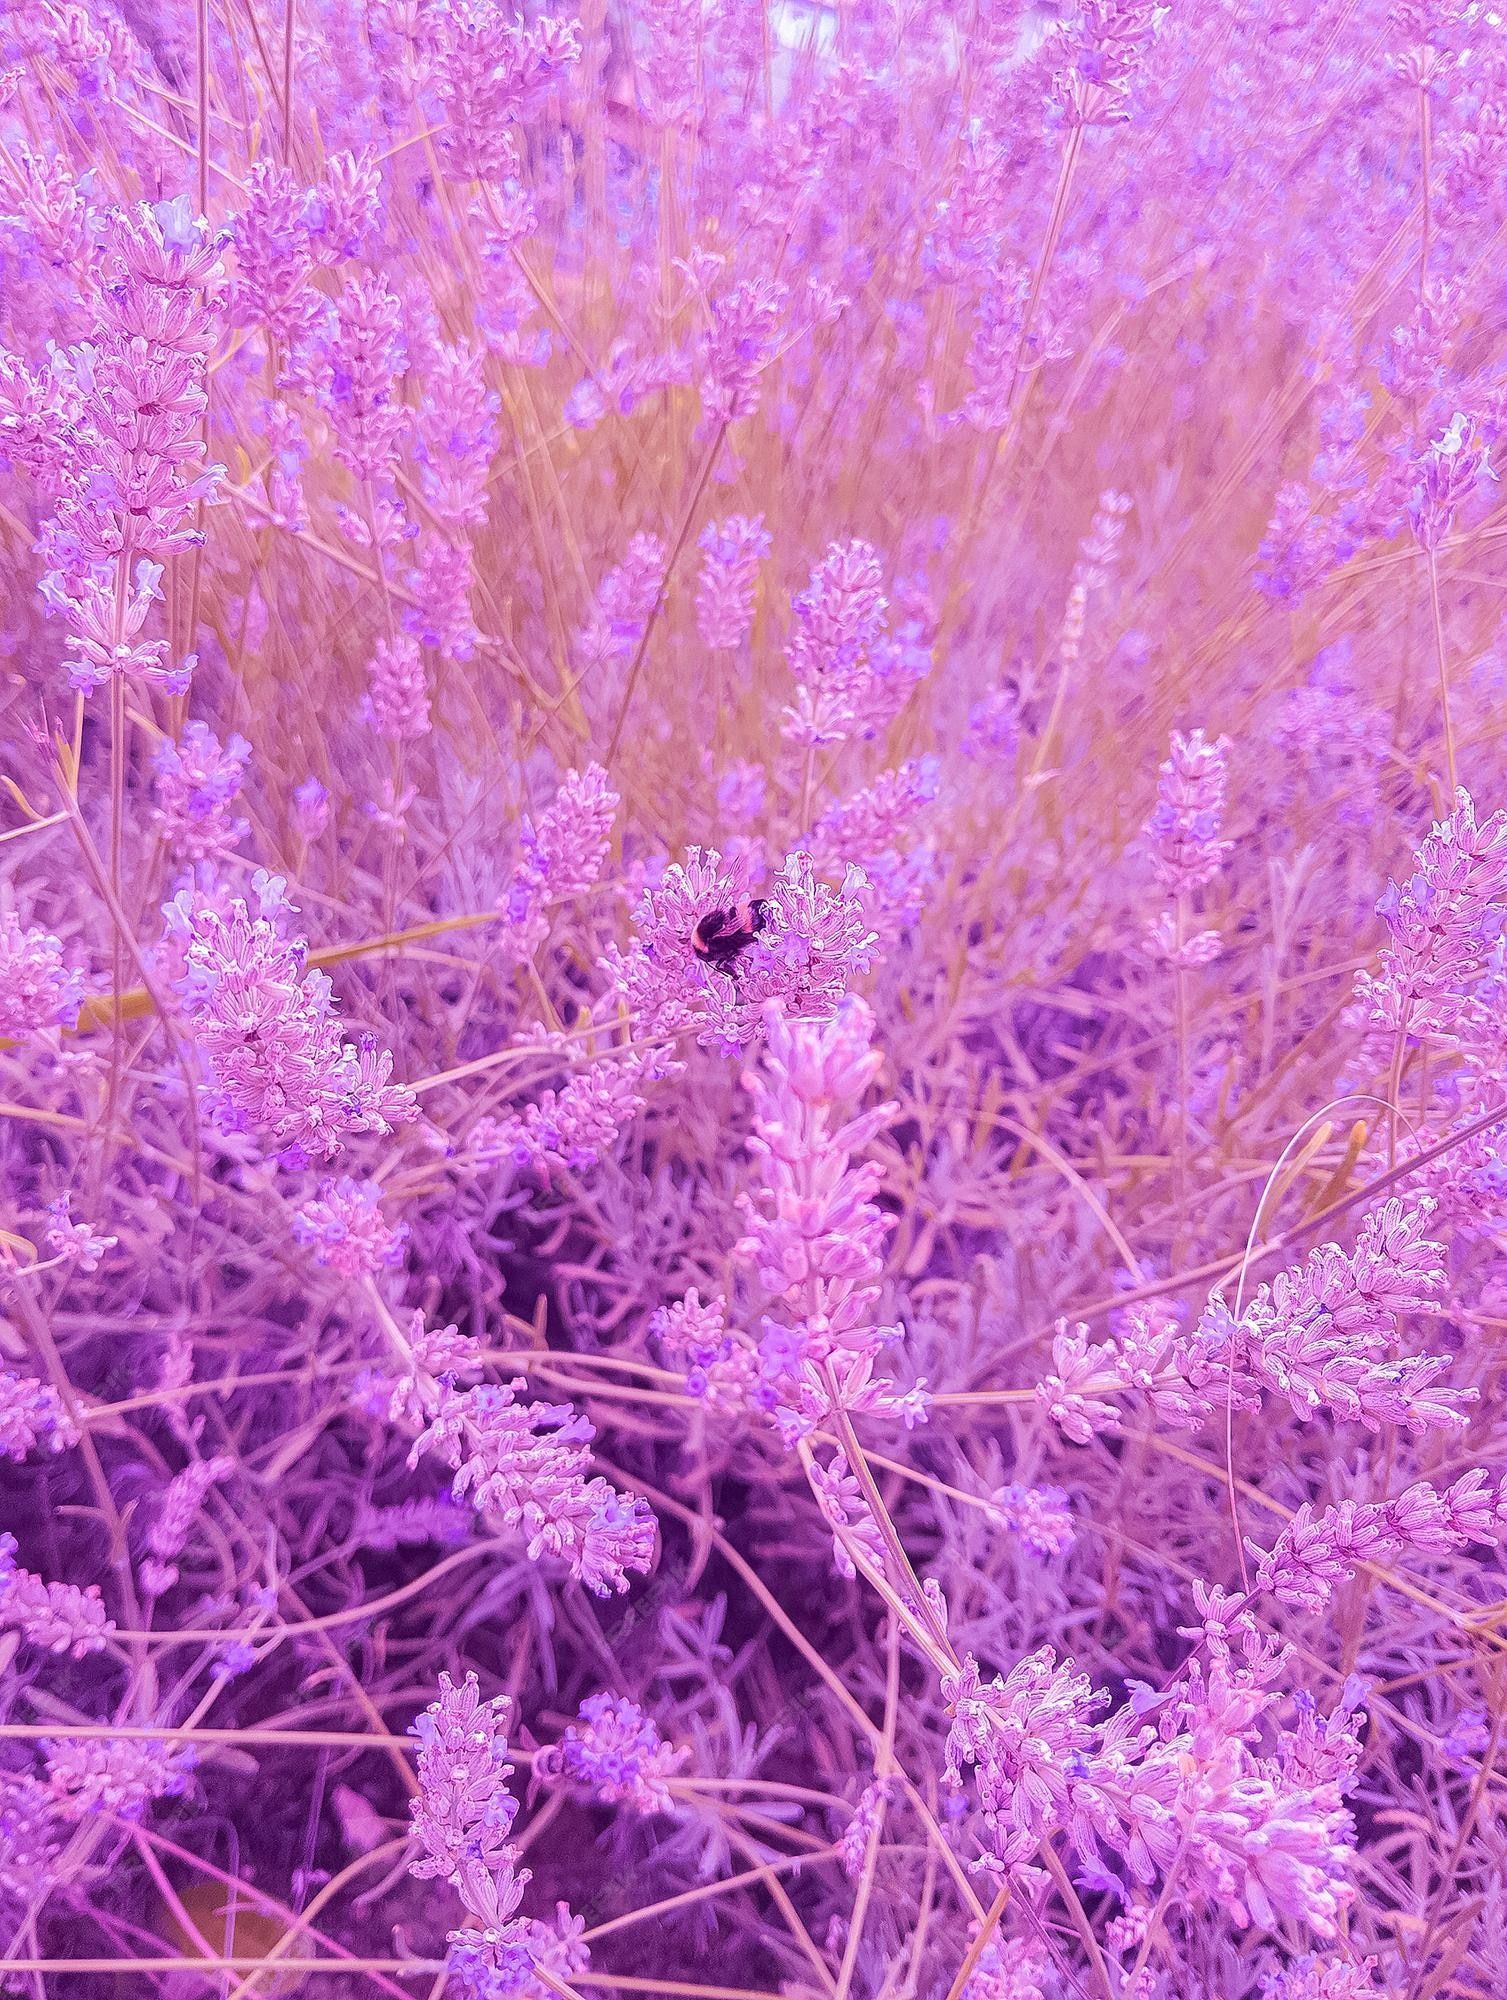 A purple plant with a bee on it - Lavender